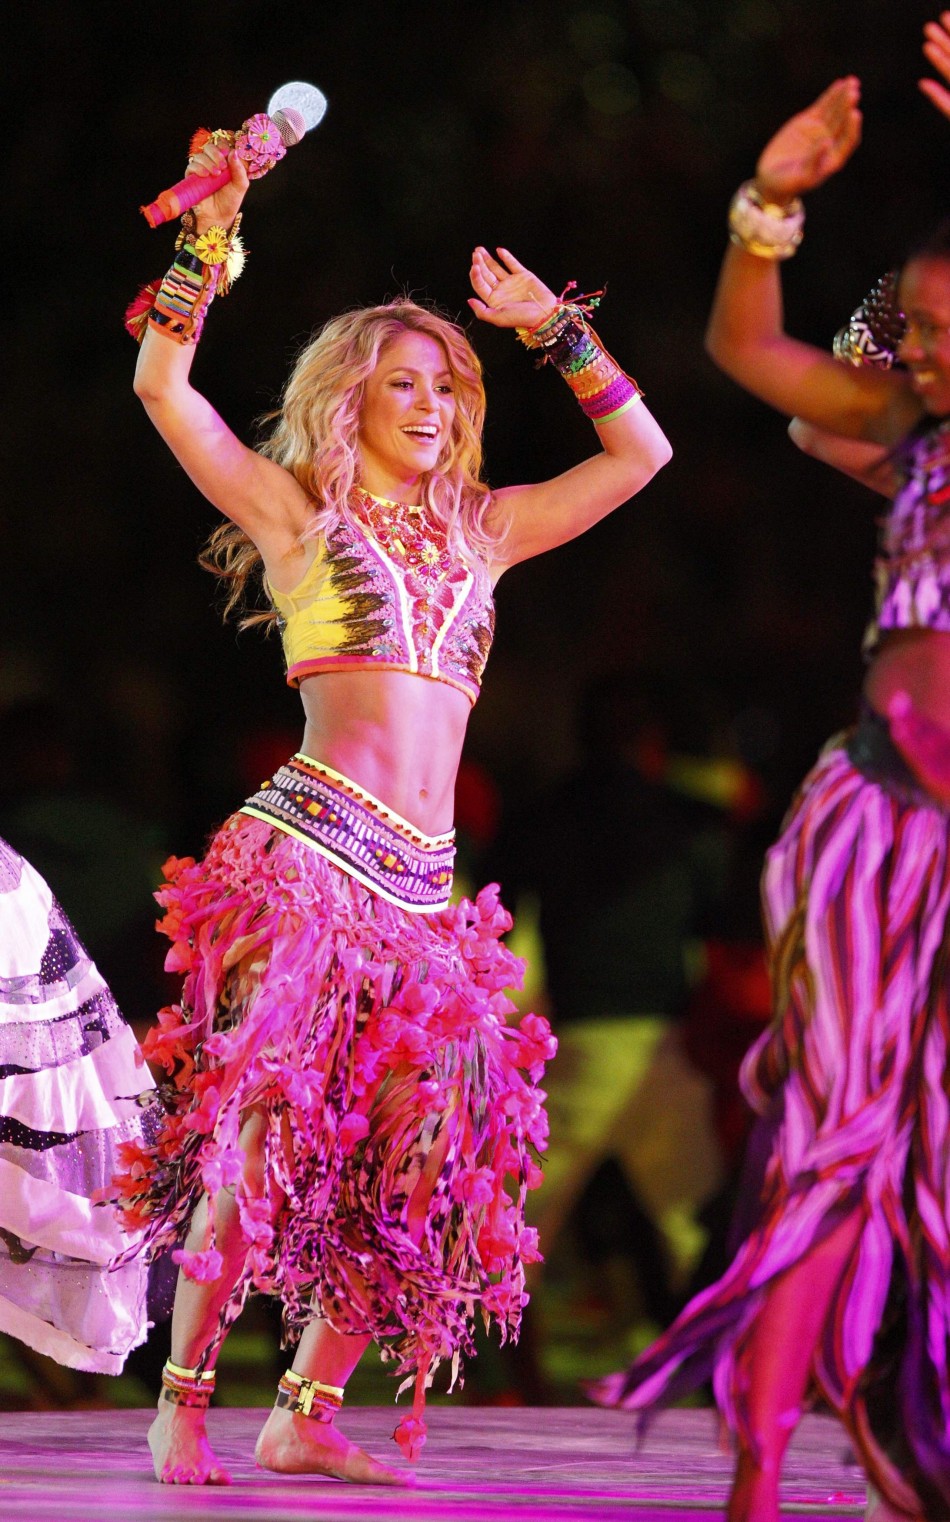 Shakira performs during the closing ceremony of the 2010 World Cup at Soccer City stadium in Johannesburg